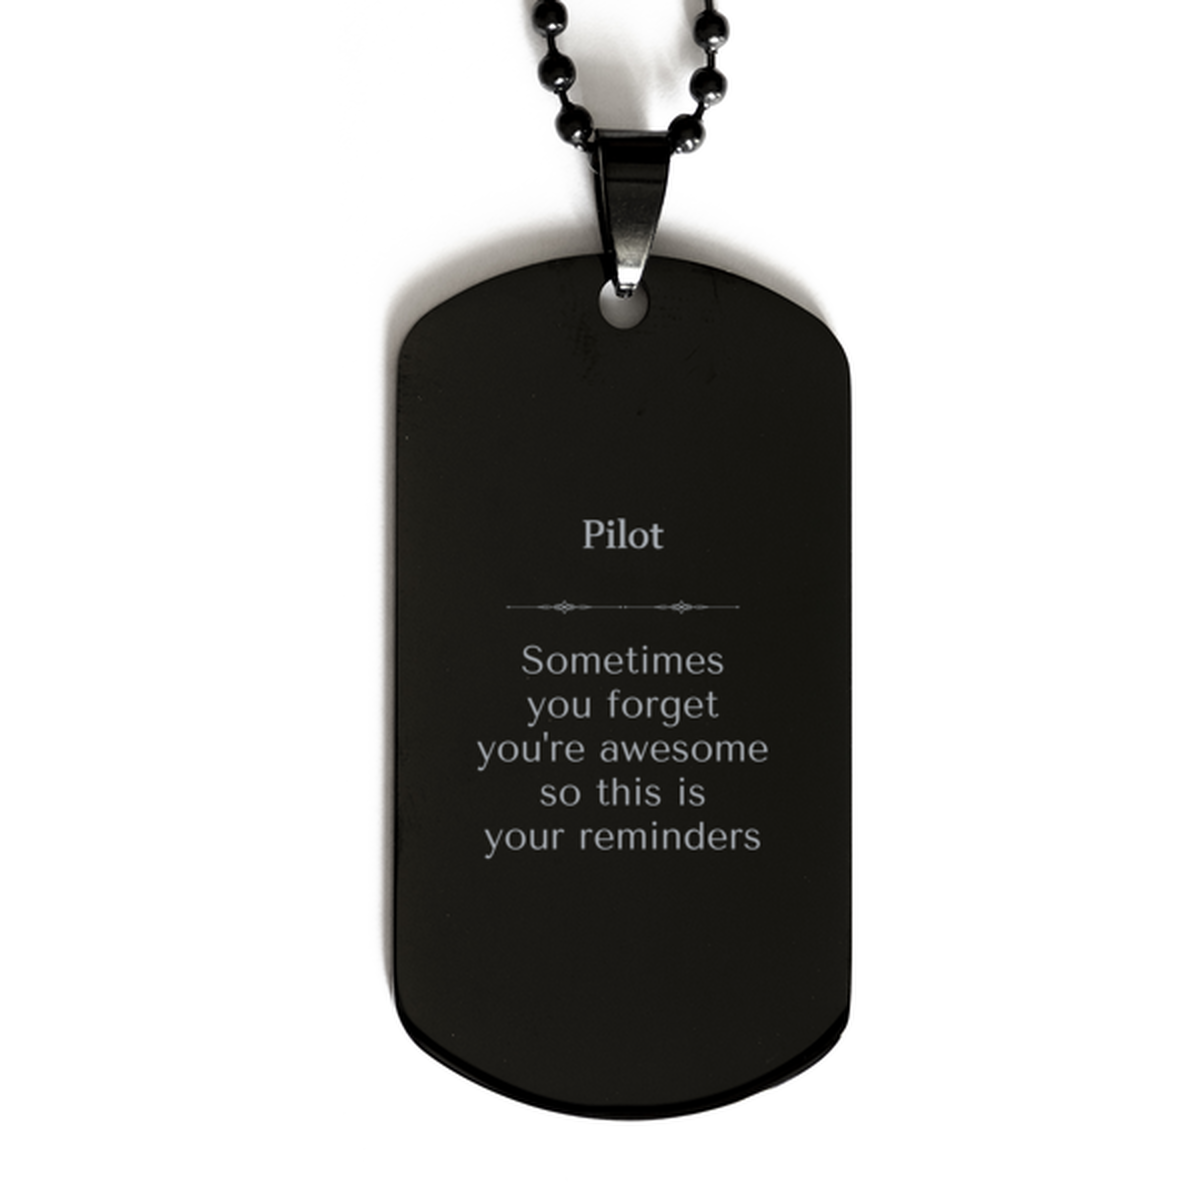 Sentimental Pilot Black Dog Tag, Pilot Sometimes you forget you're awesome so this is your reminders, Graduation Christmas Birthday Gifts for Pilot, Men, Women, Coworkers